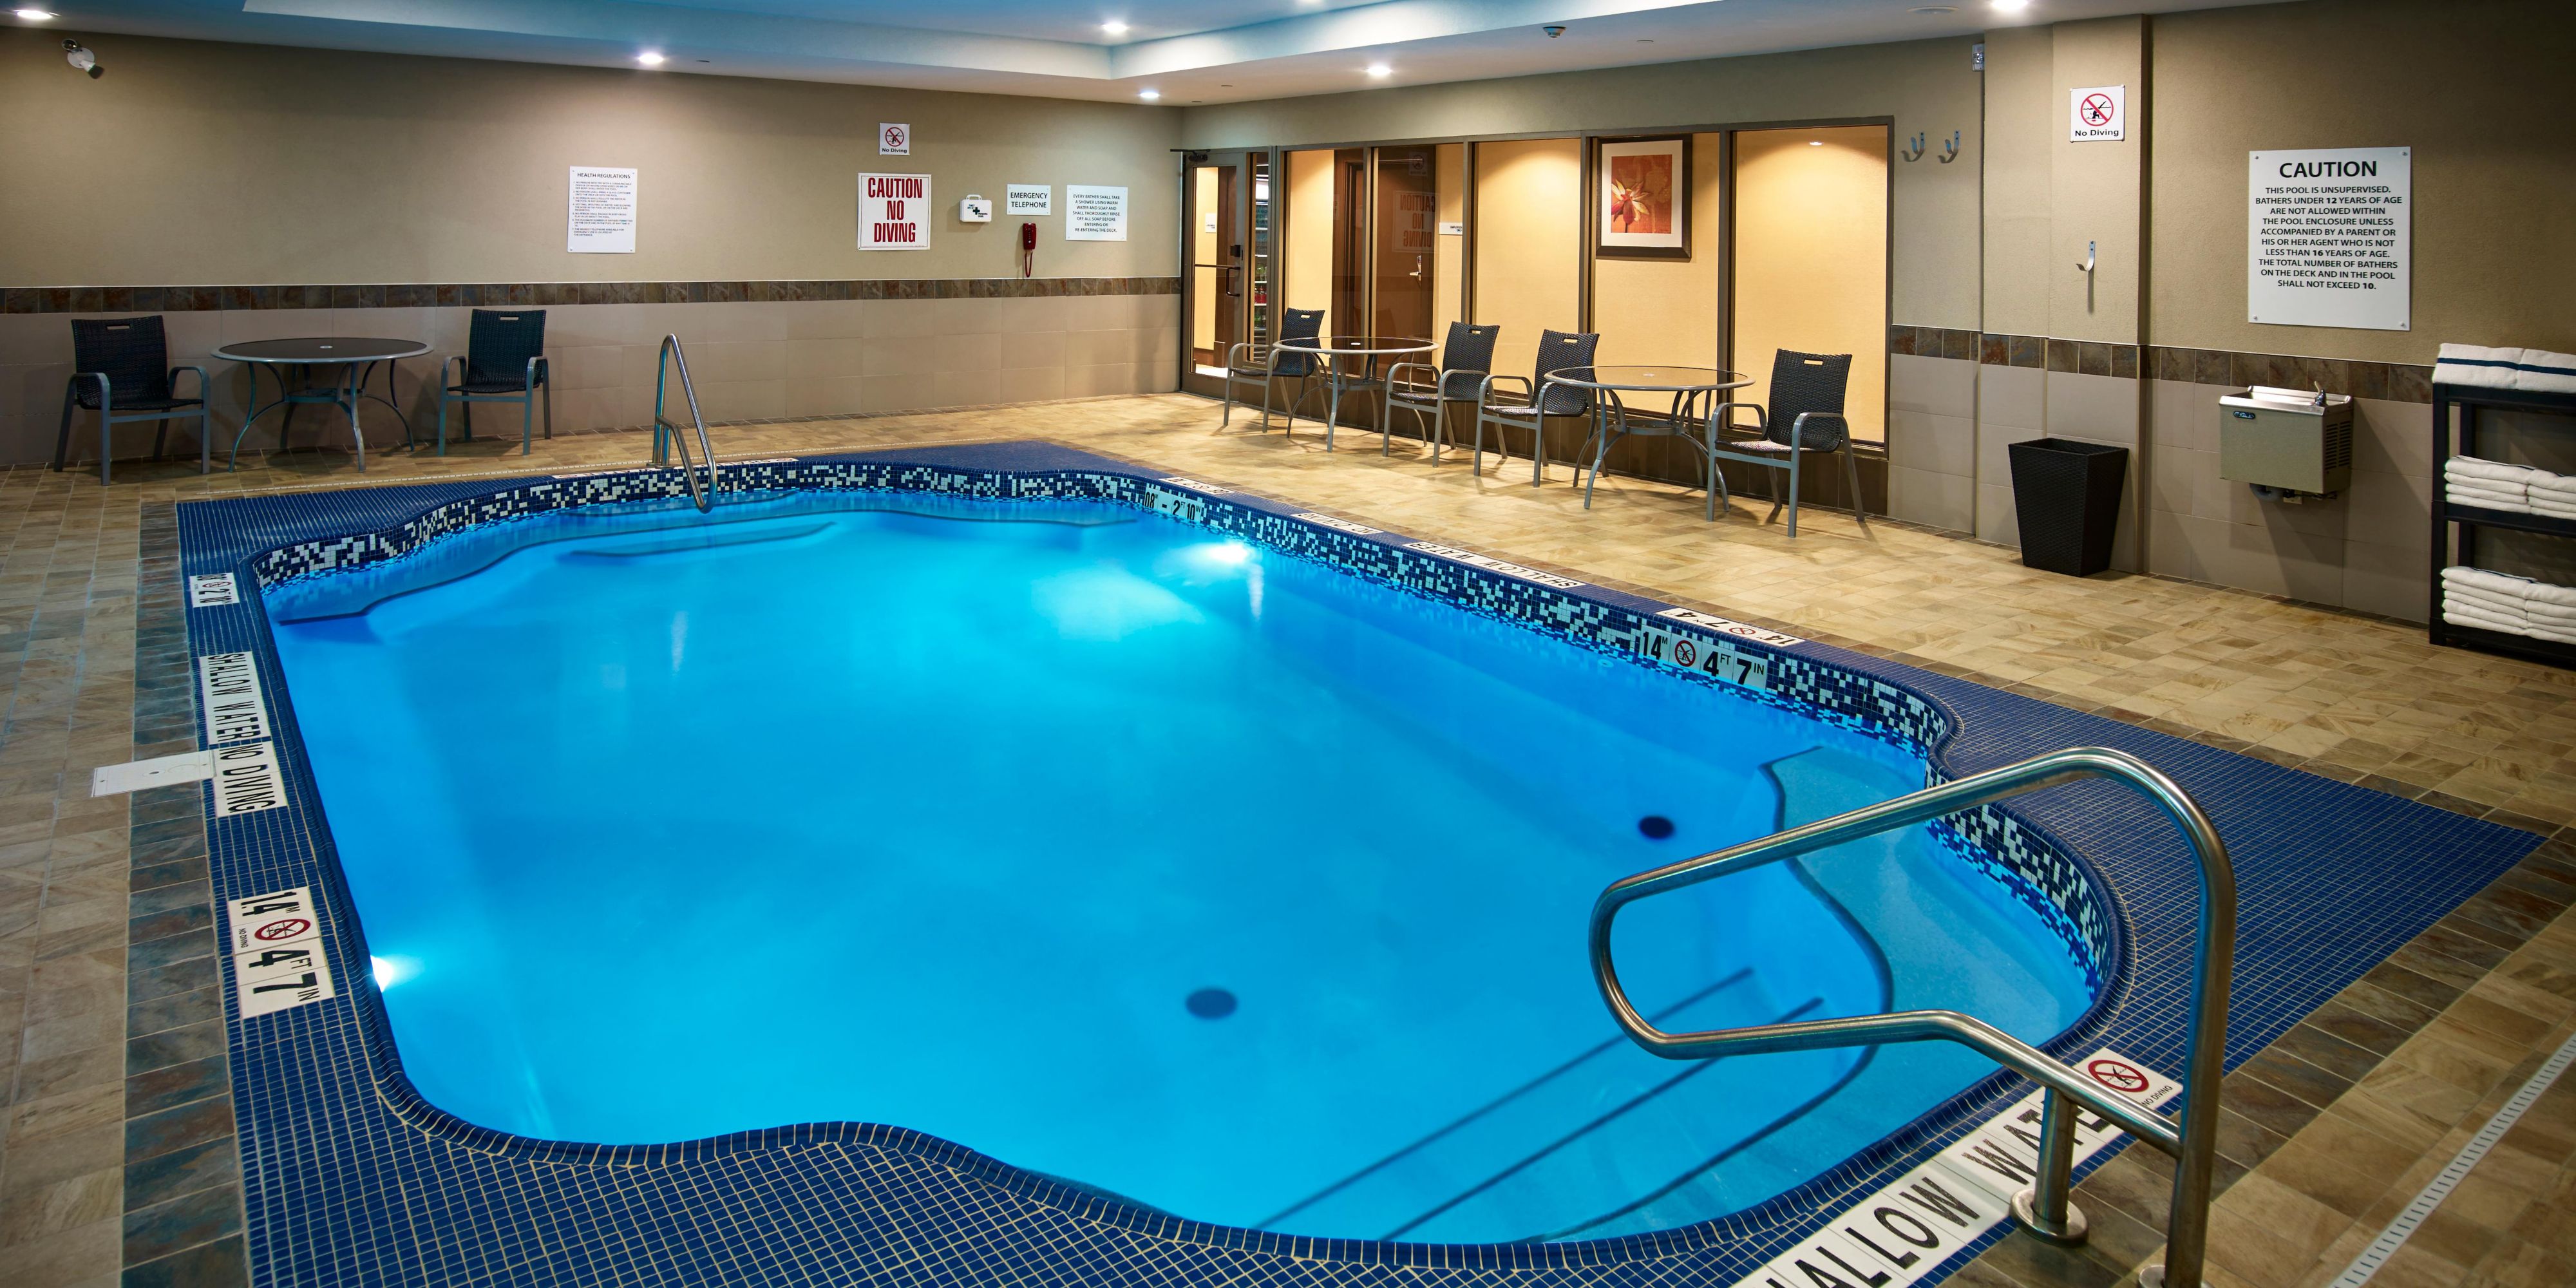 Enjoy our indoor heated pool on your next visit. Open daily from 7am to 11pm. 